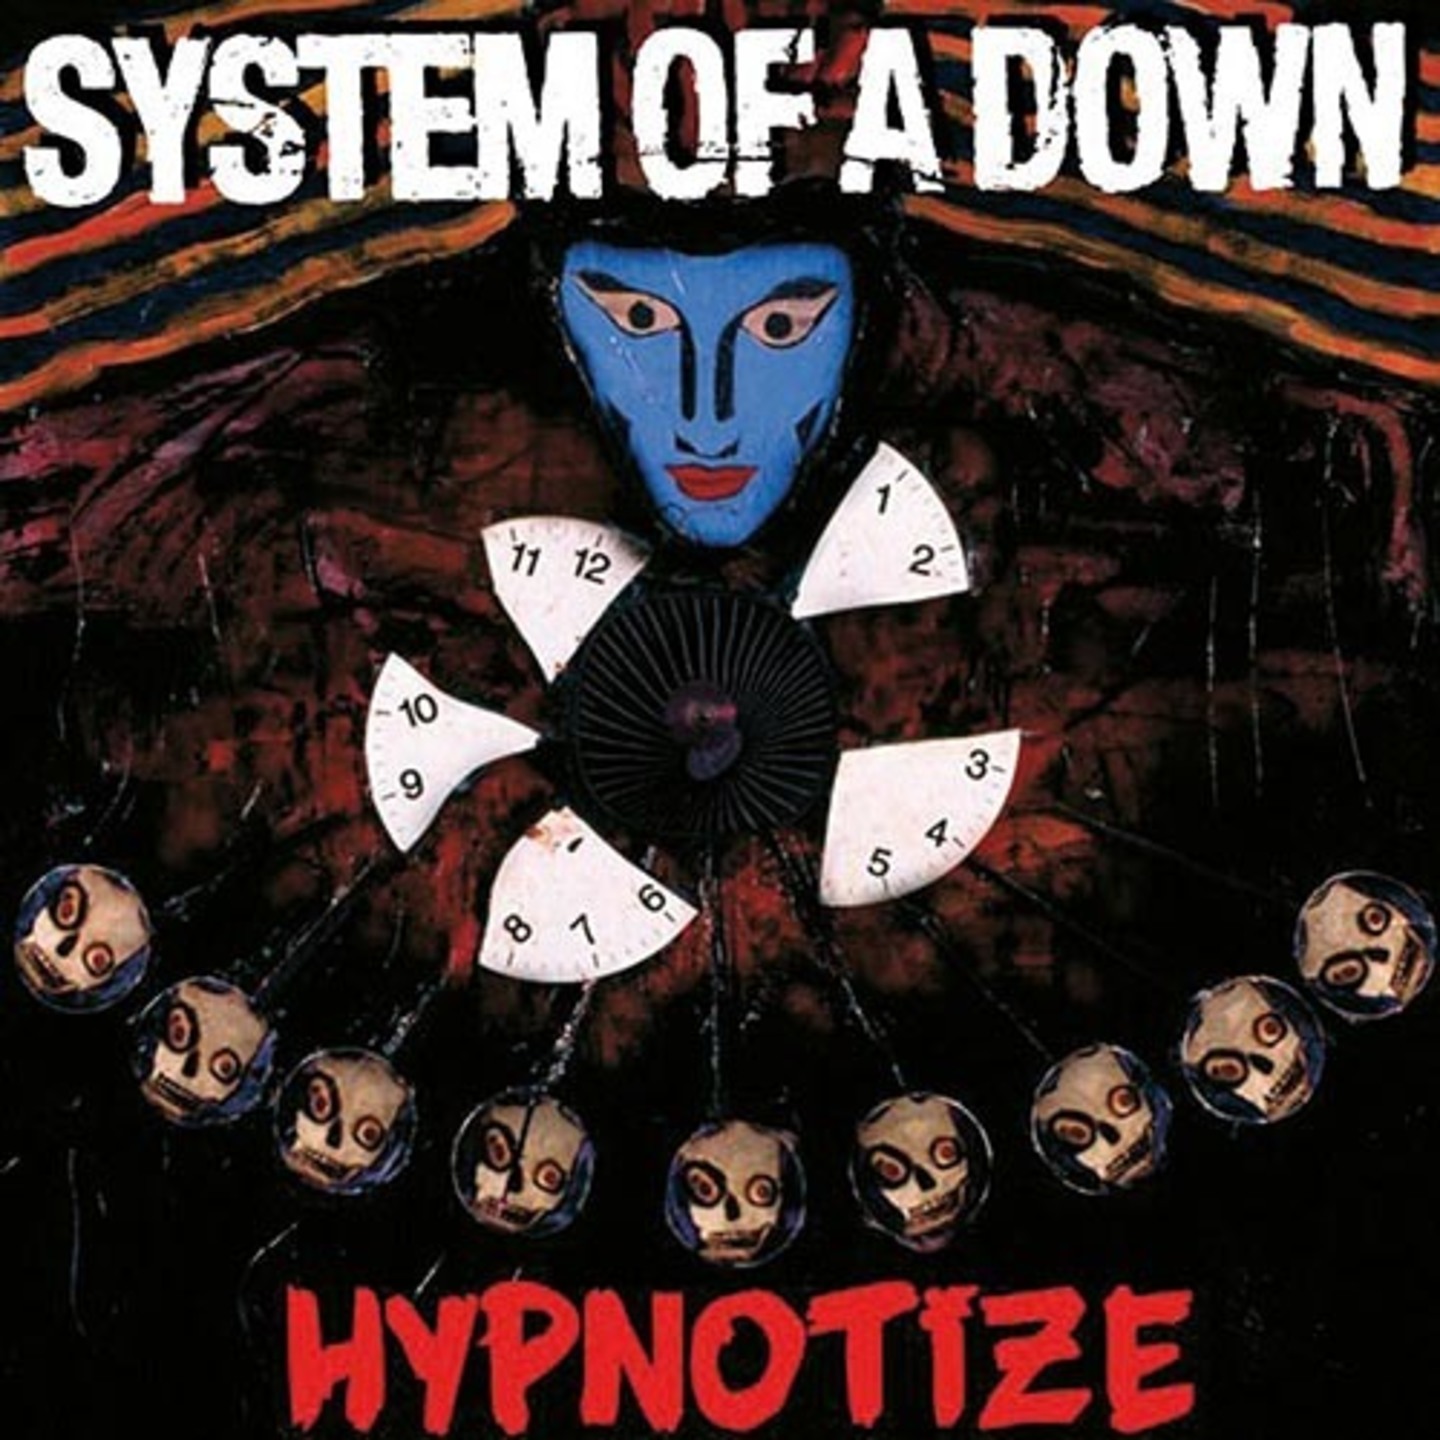 SYSTEM OF A DOWN - Hypnotize LP